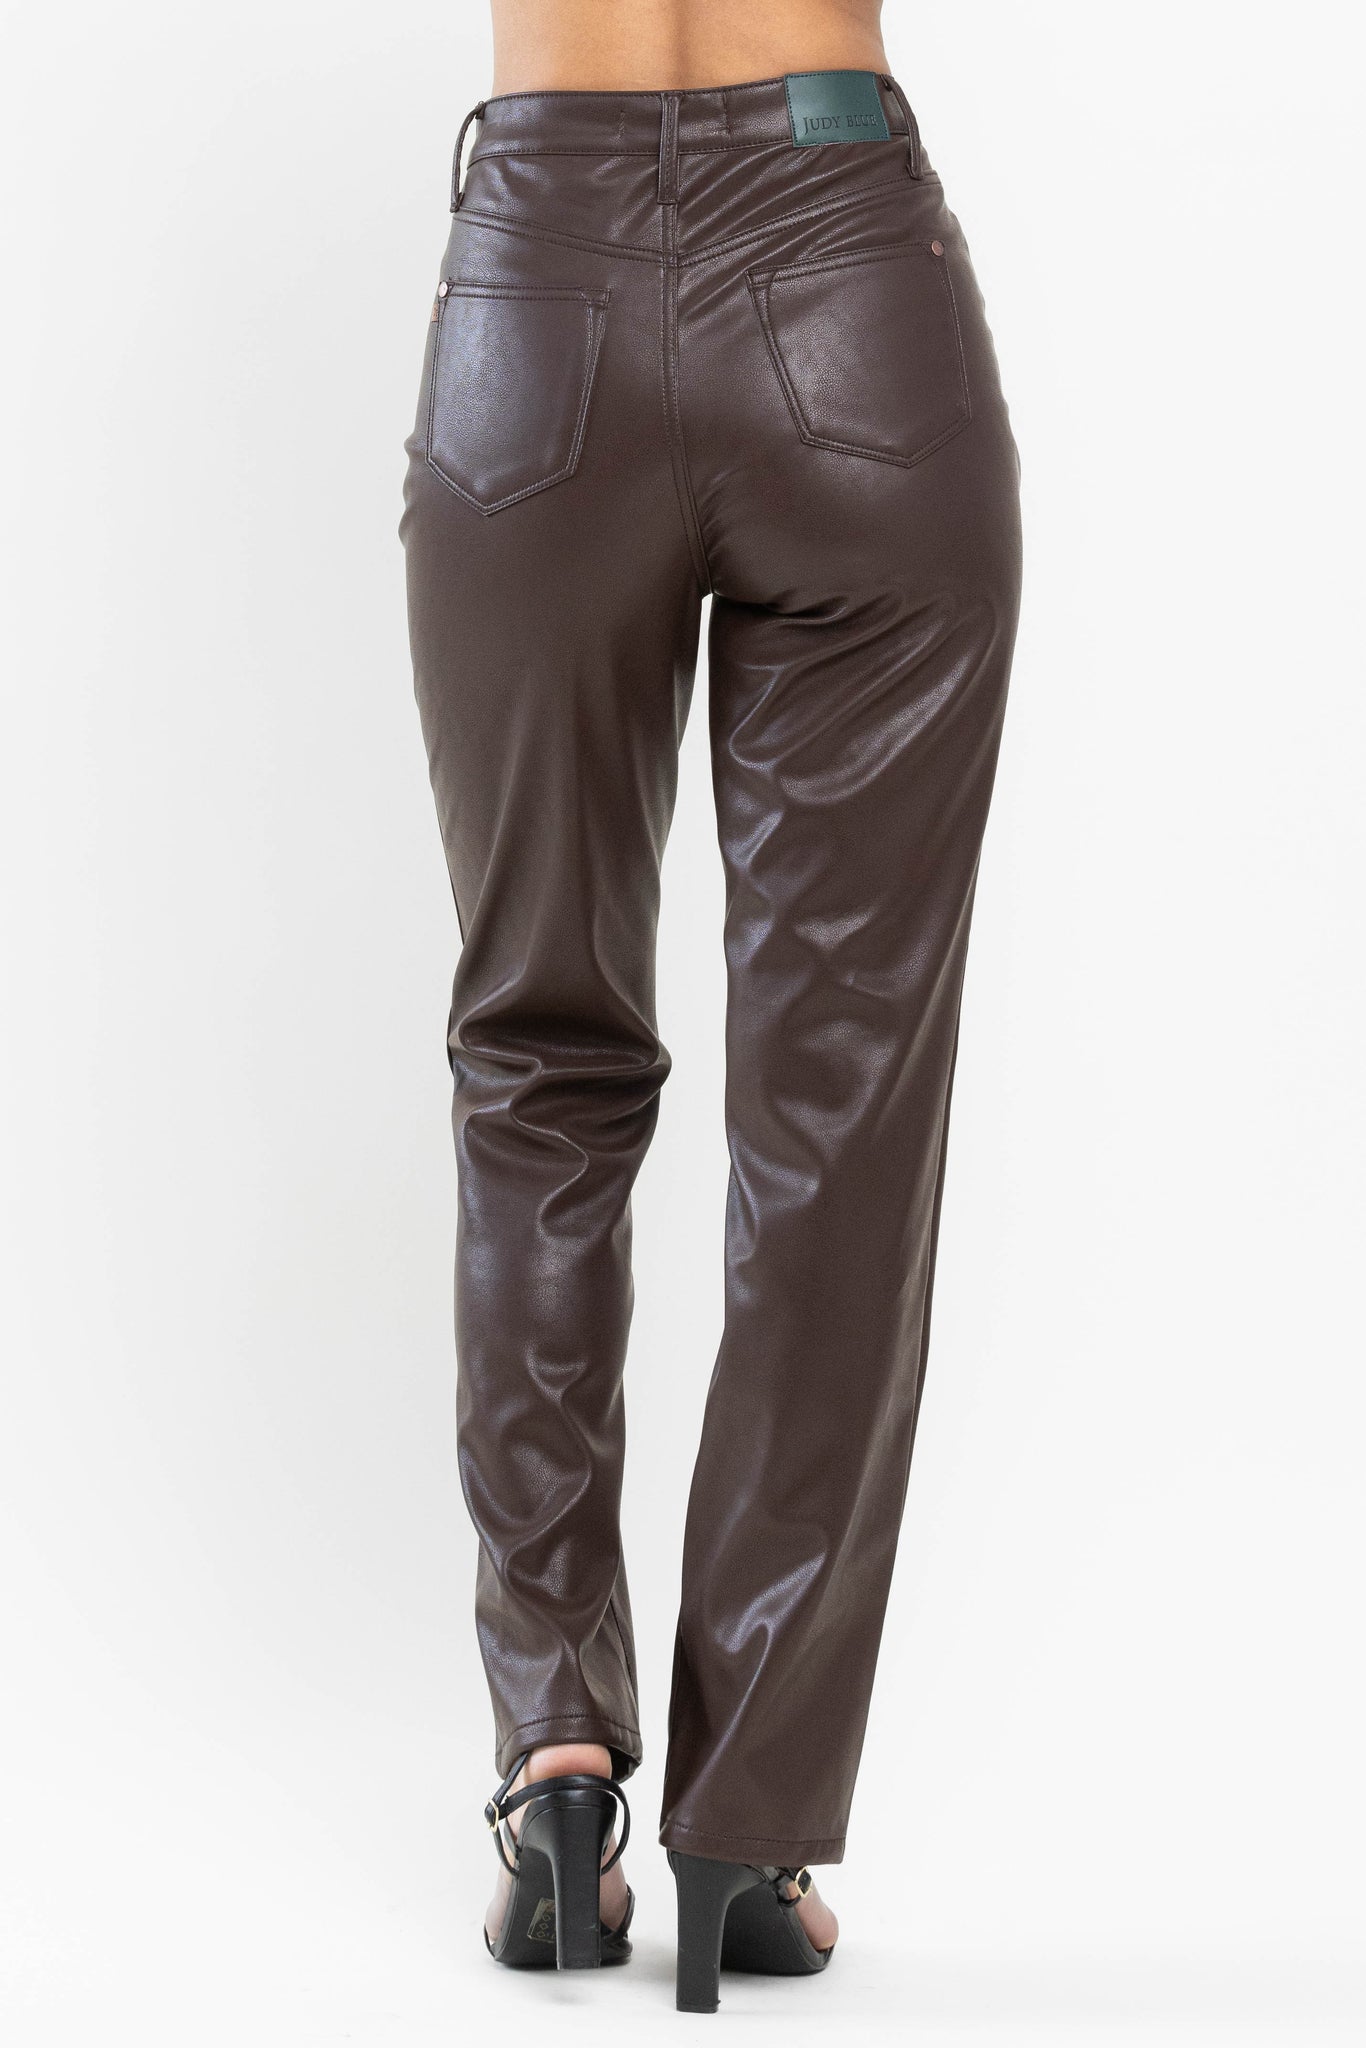 Tummy Control Judy Blue Faux Leather Pants Expresso – Sue's